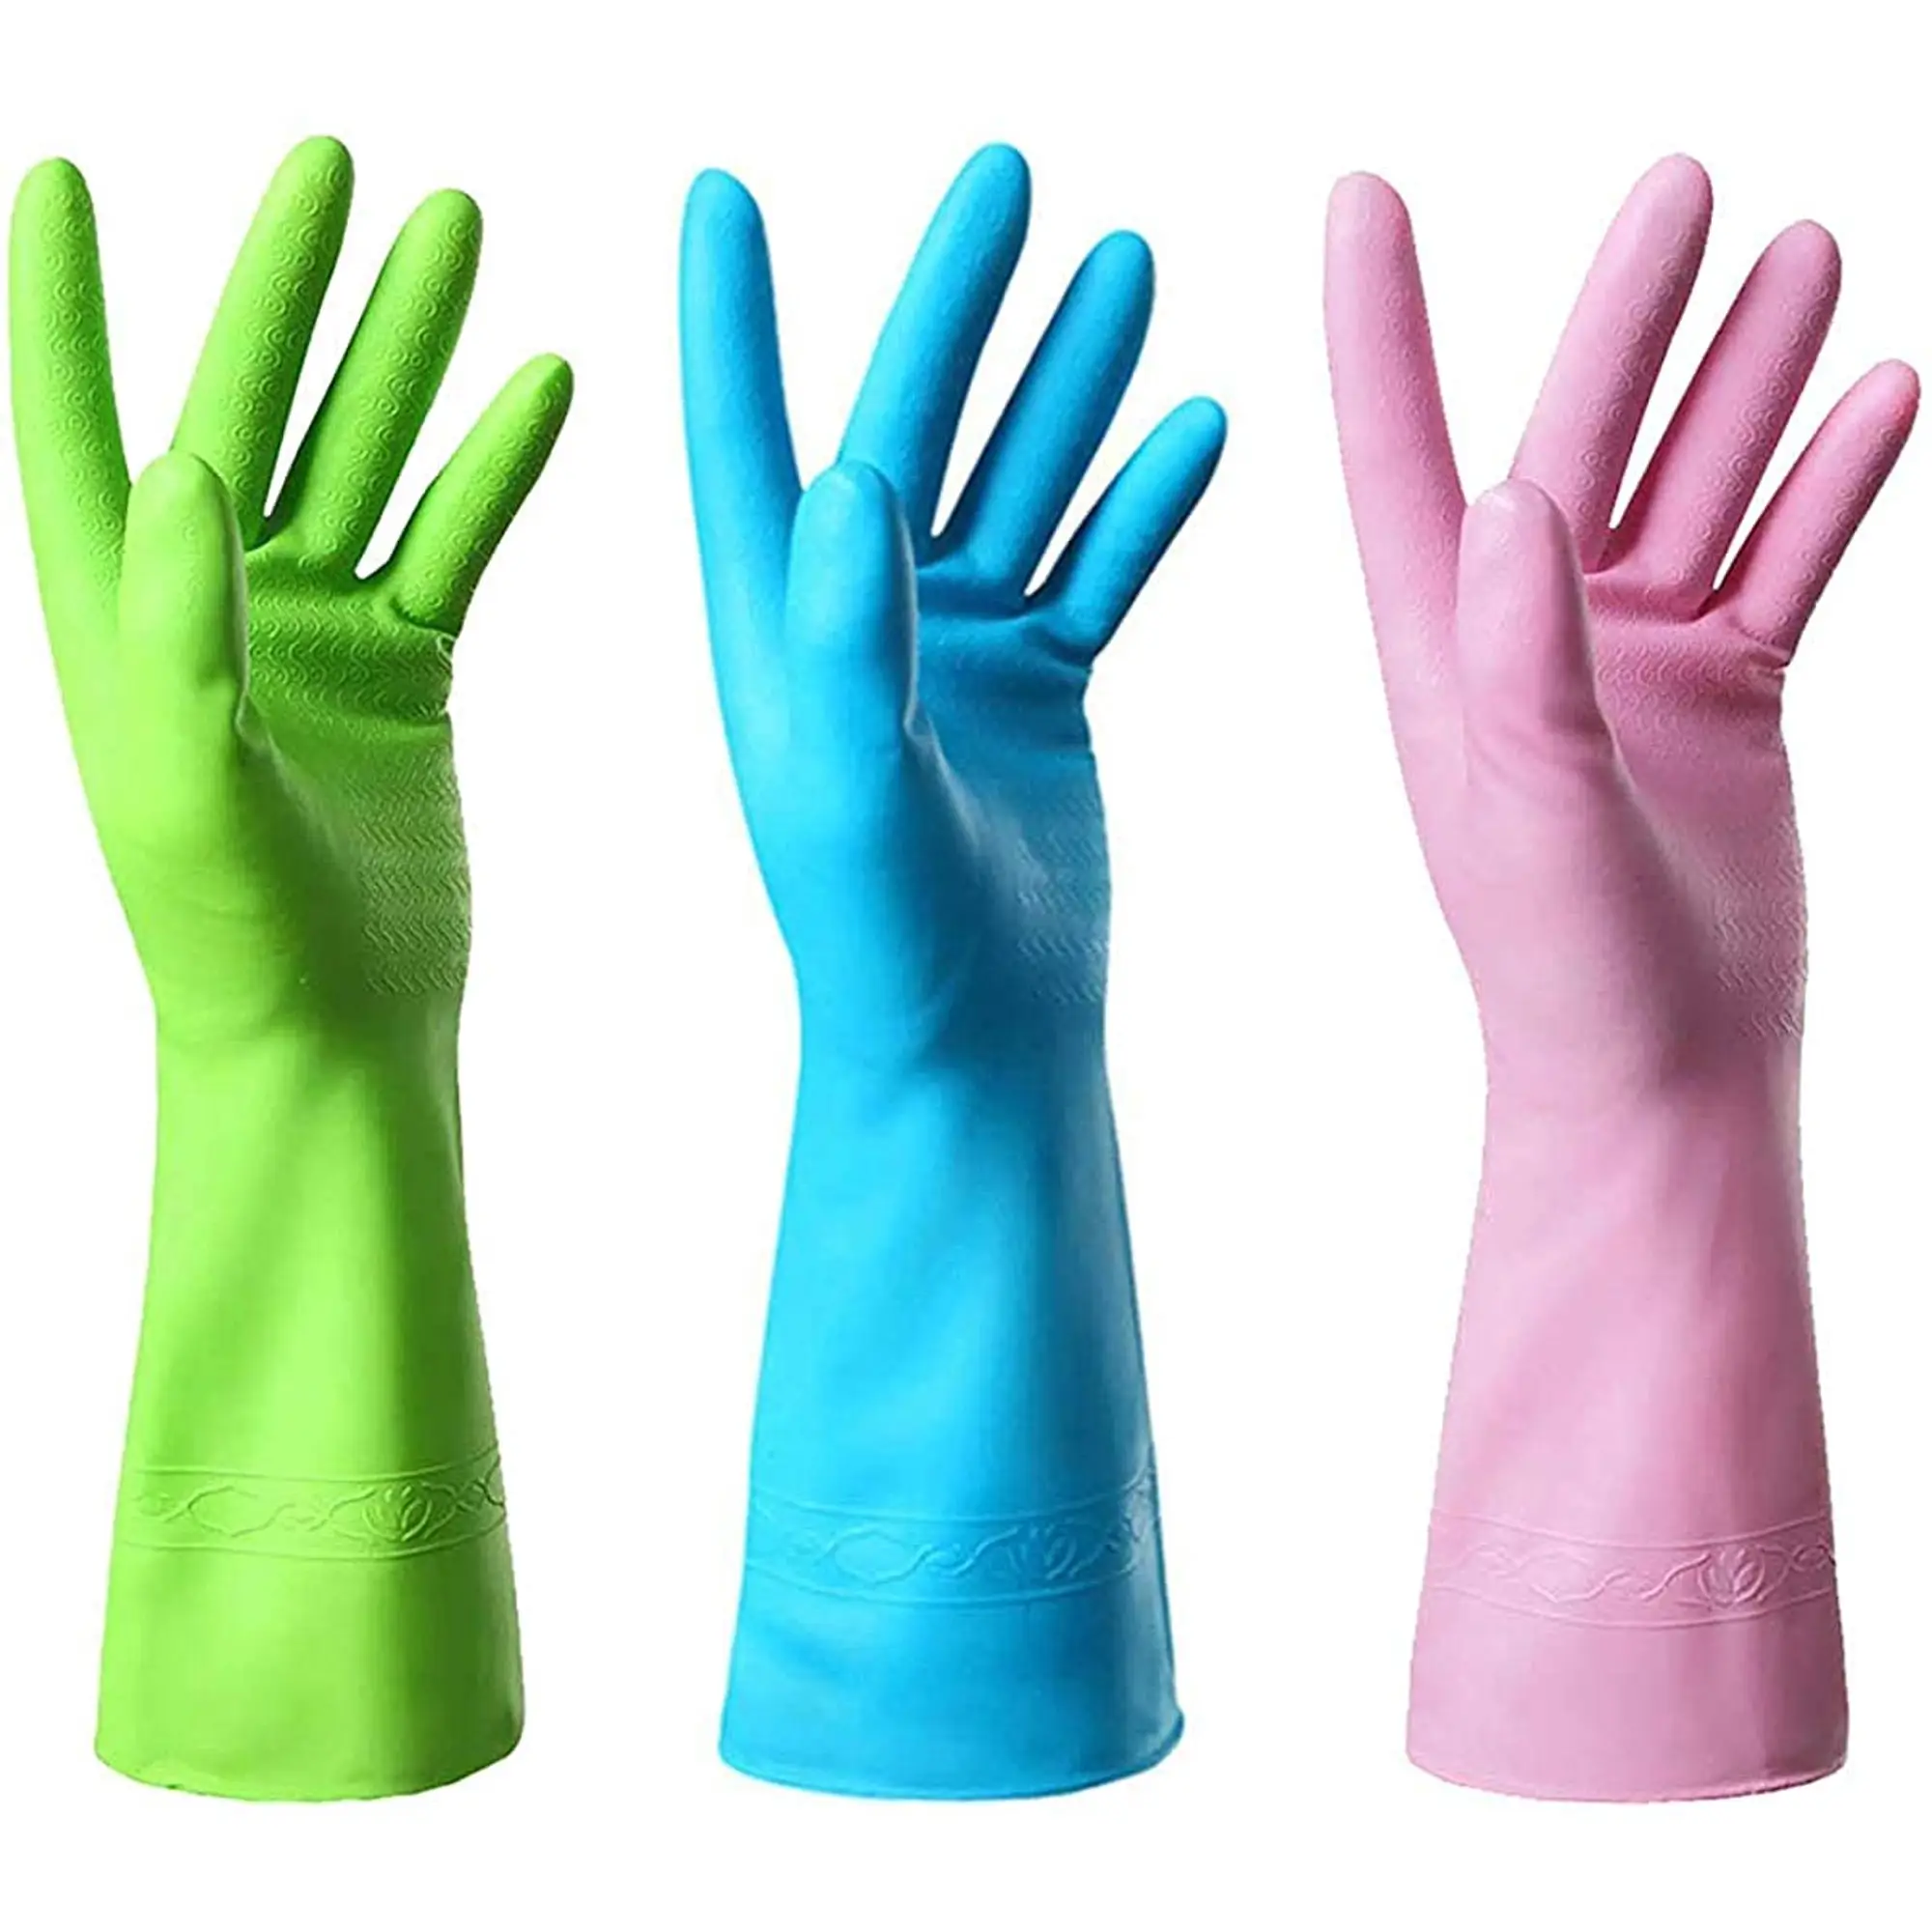 Foodgrade Kitchen Winter Blue Latex Free Household Dishwashing Cleaning Gloves Reusable Waterproof Long S L Gloves